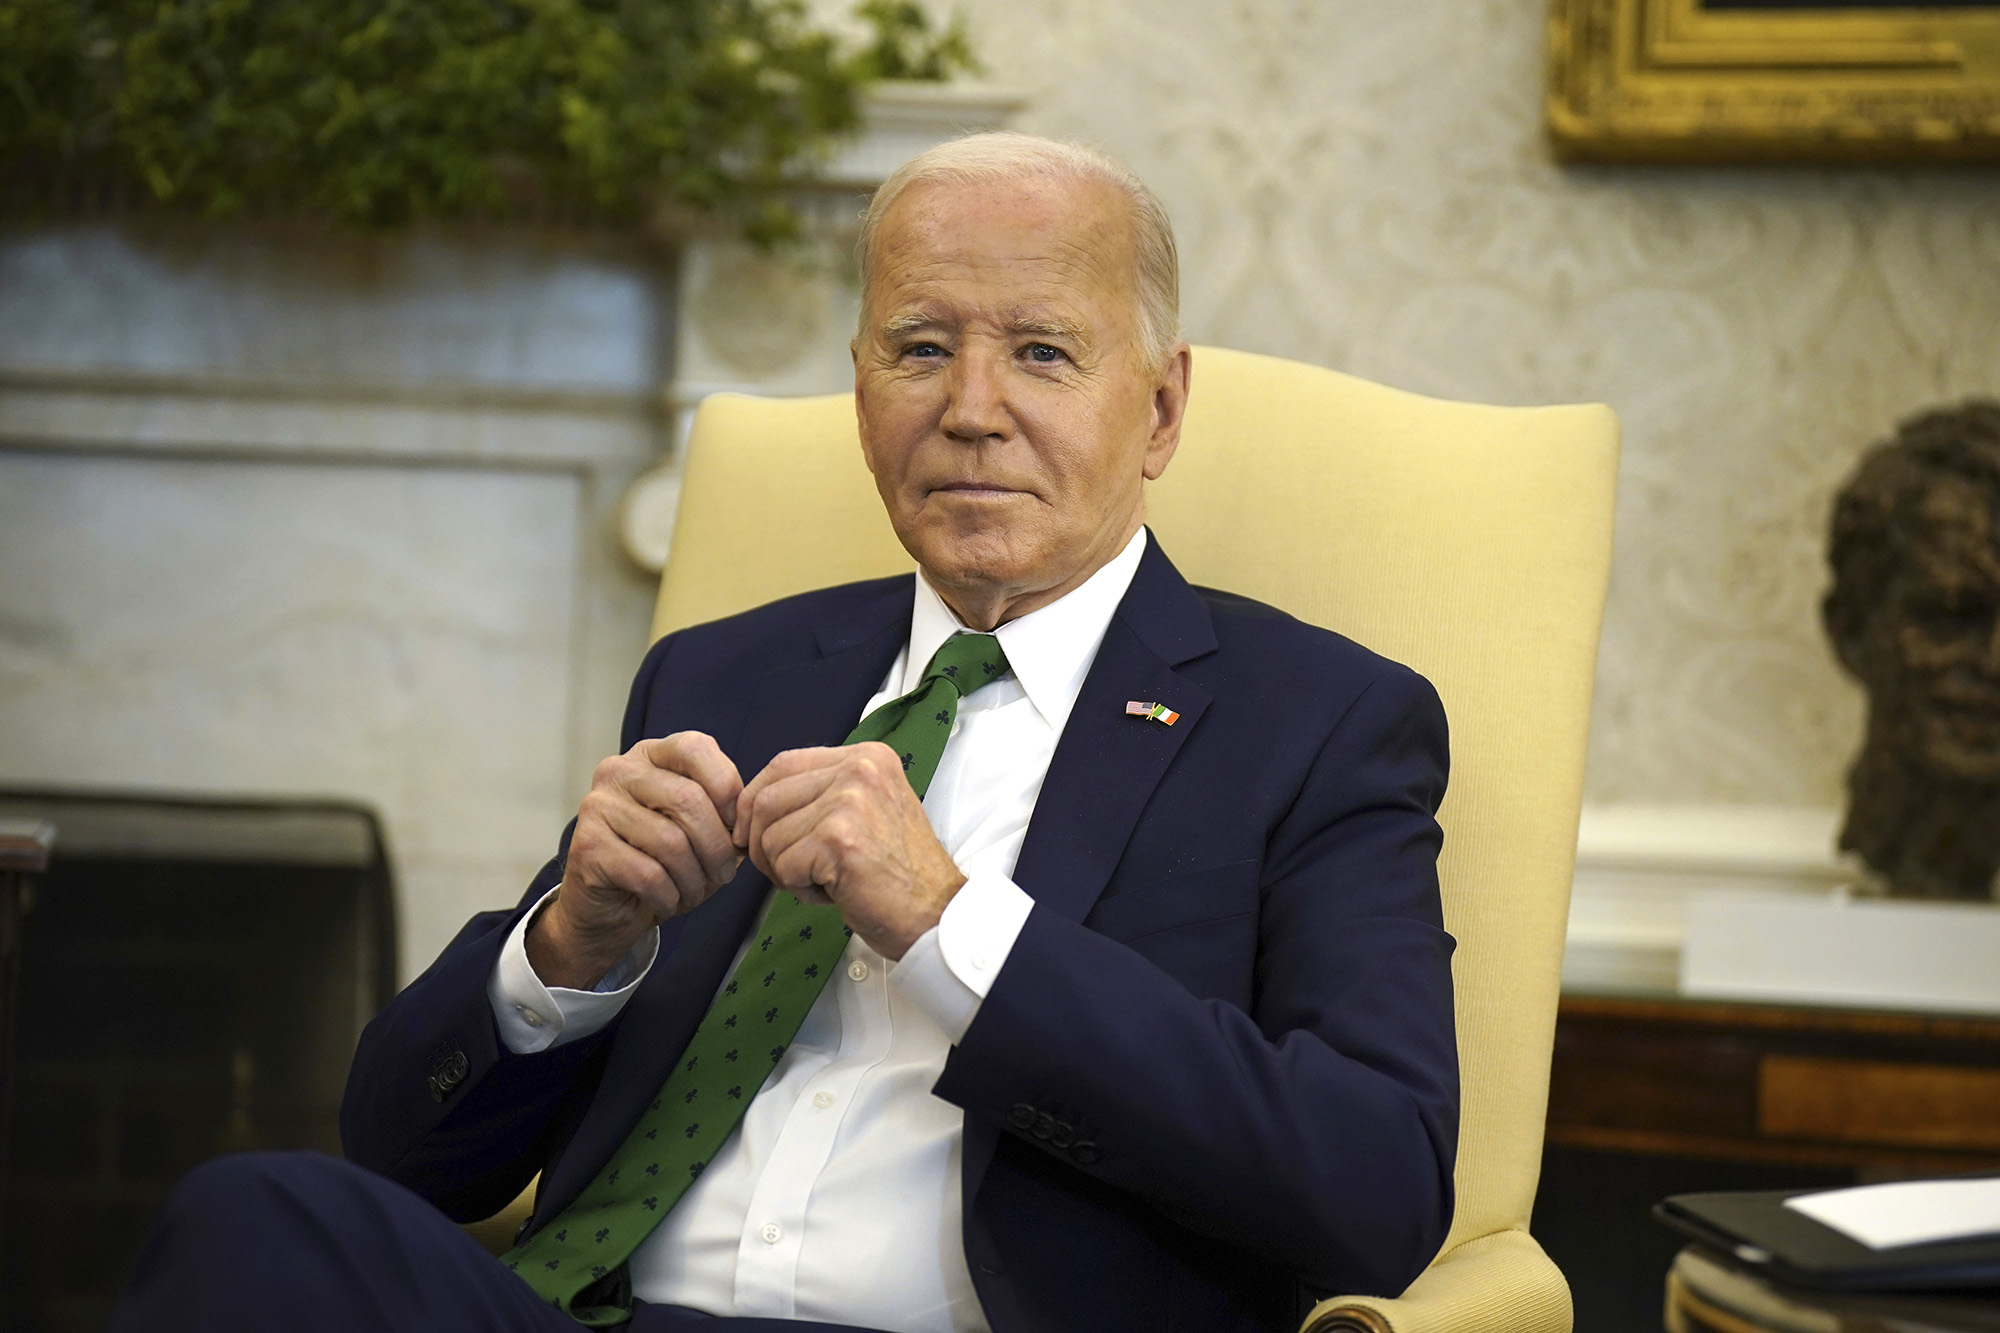 President Joe Biden in the Oval Office at the White House in Washington, DC, on March 15.